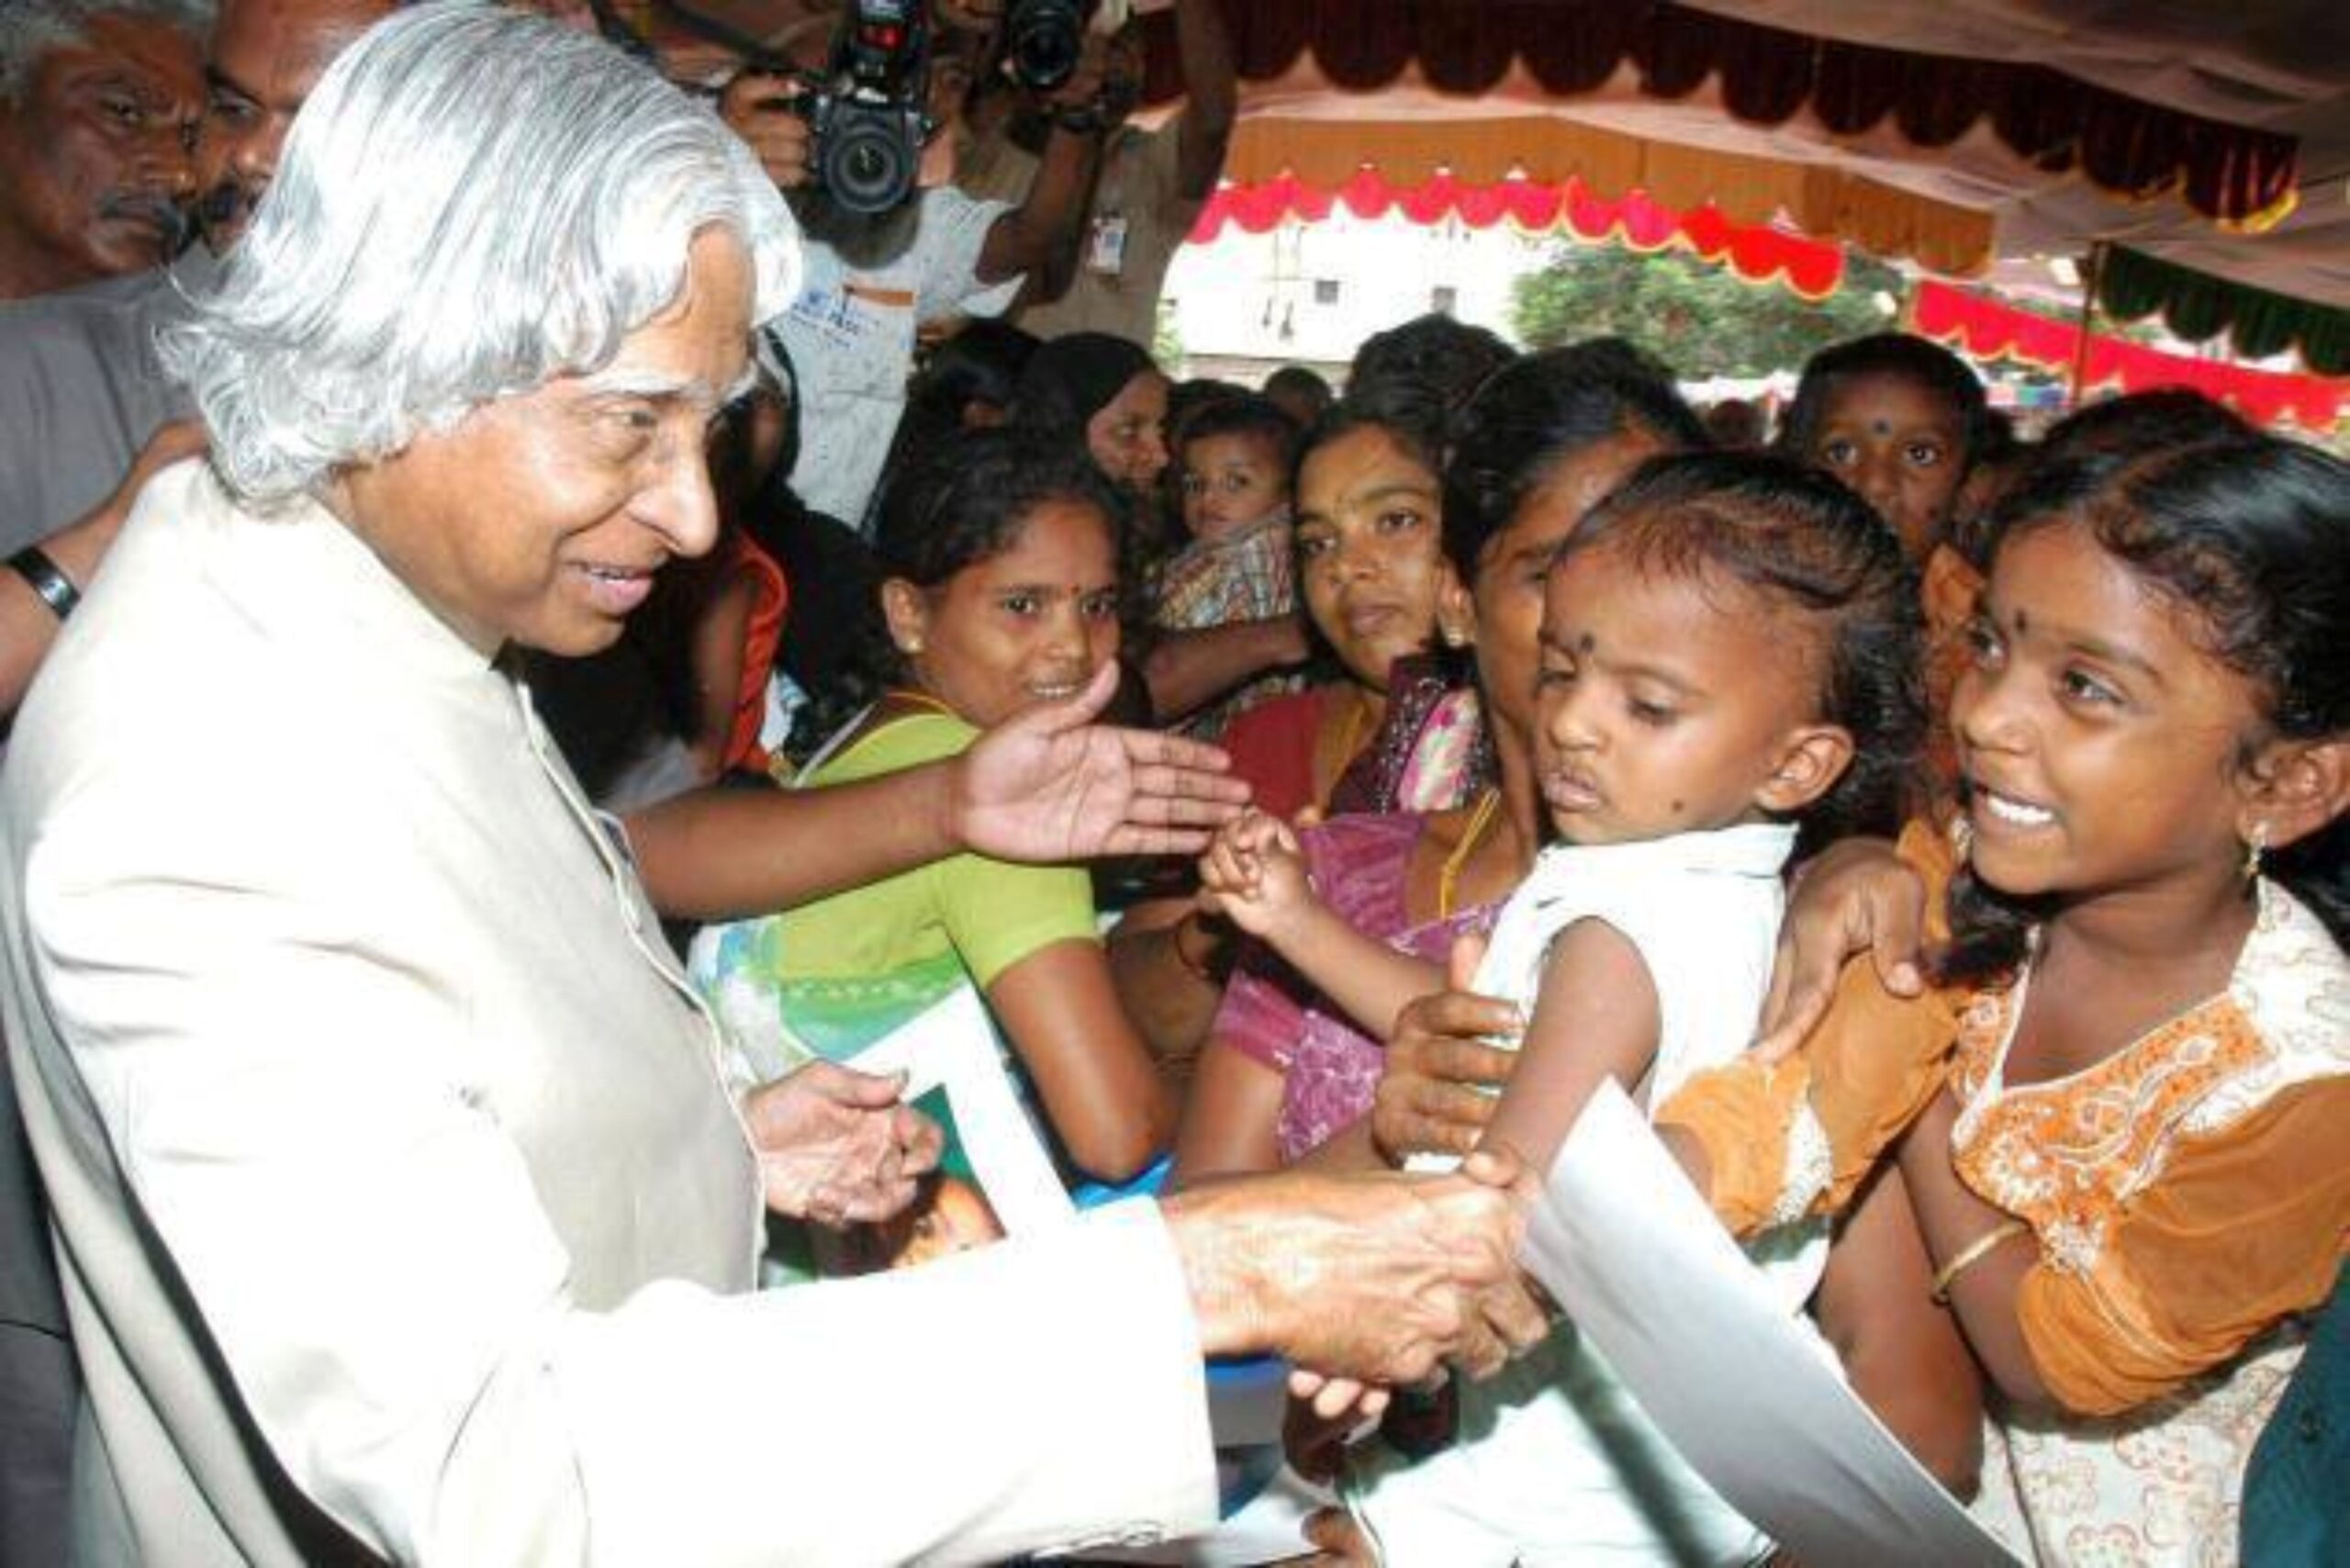 A life richer by virtues: Remembering Dr. Kalam